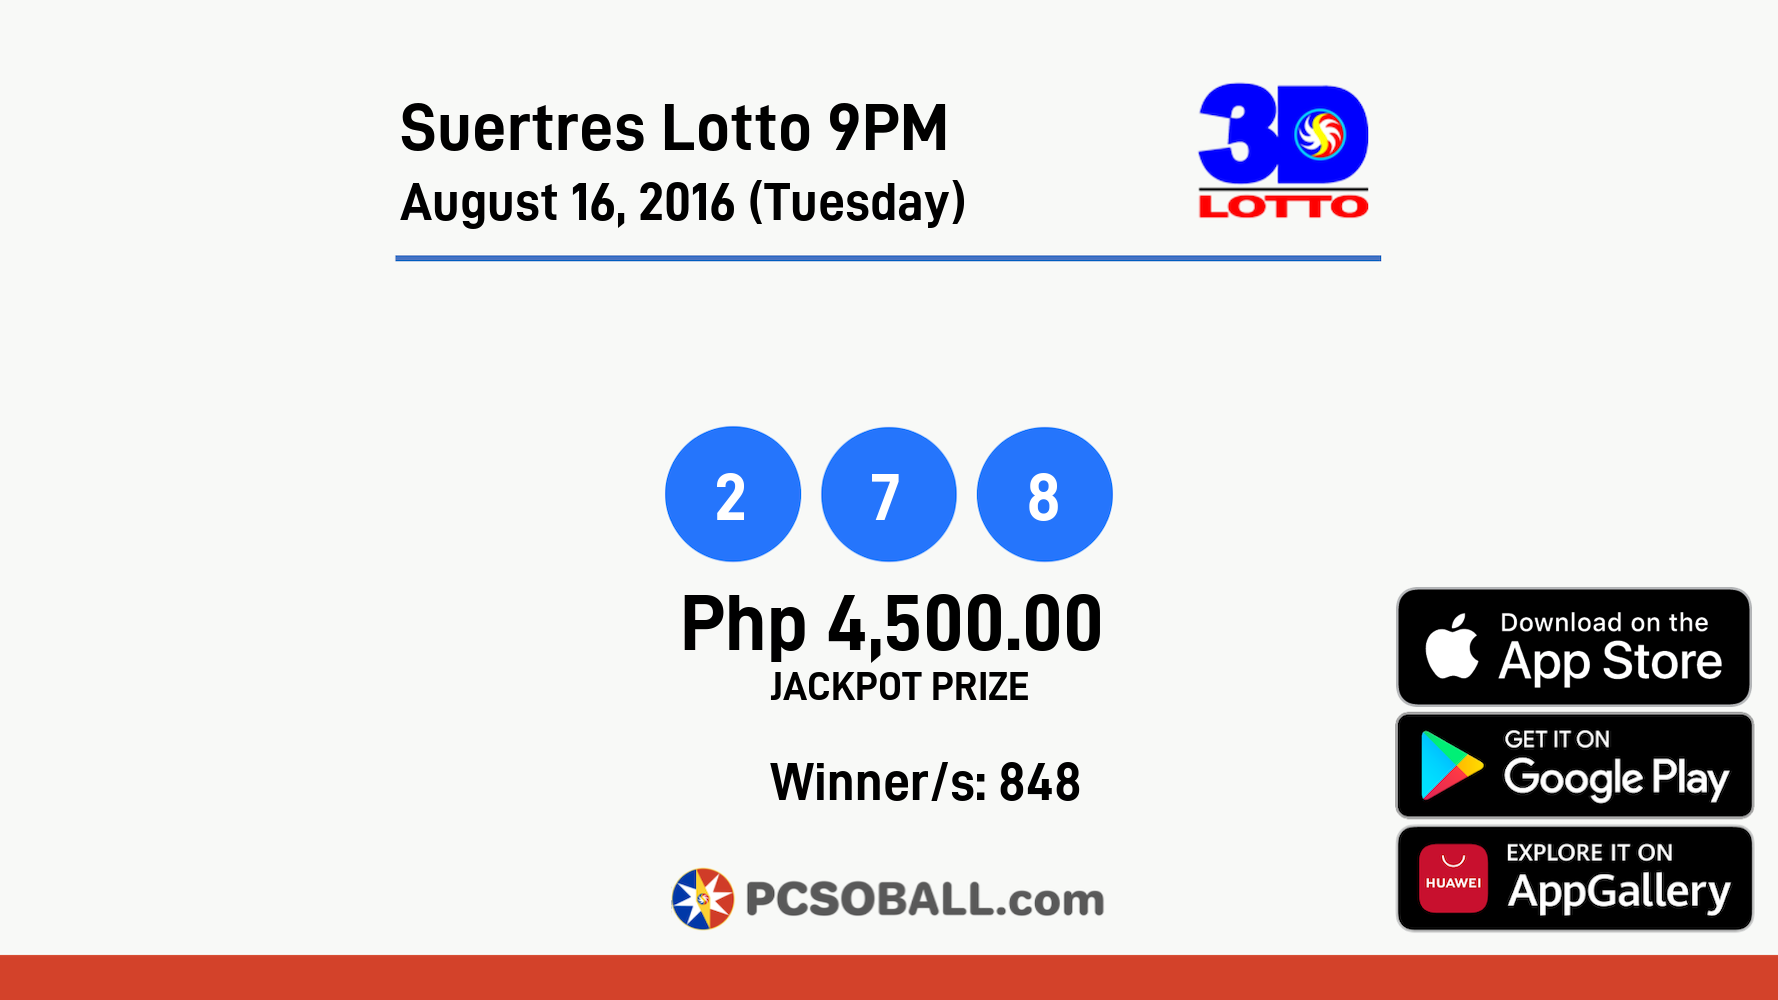 Suertres Lotto 9PM August 16, 2016 (Tuesday) Result